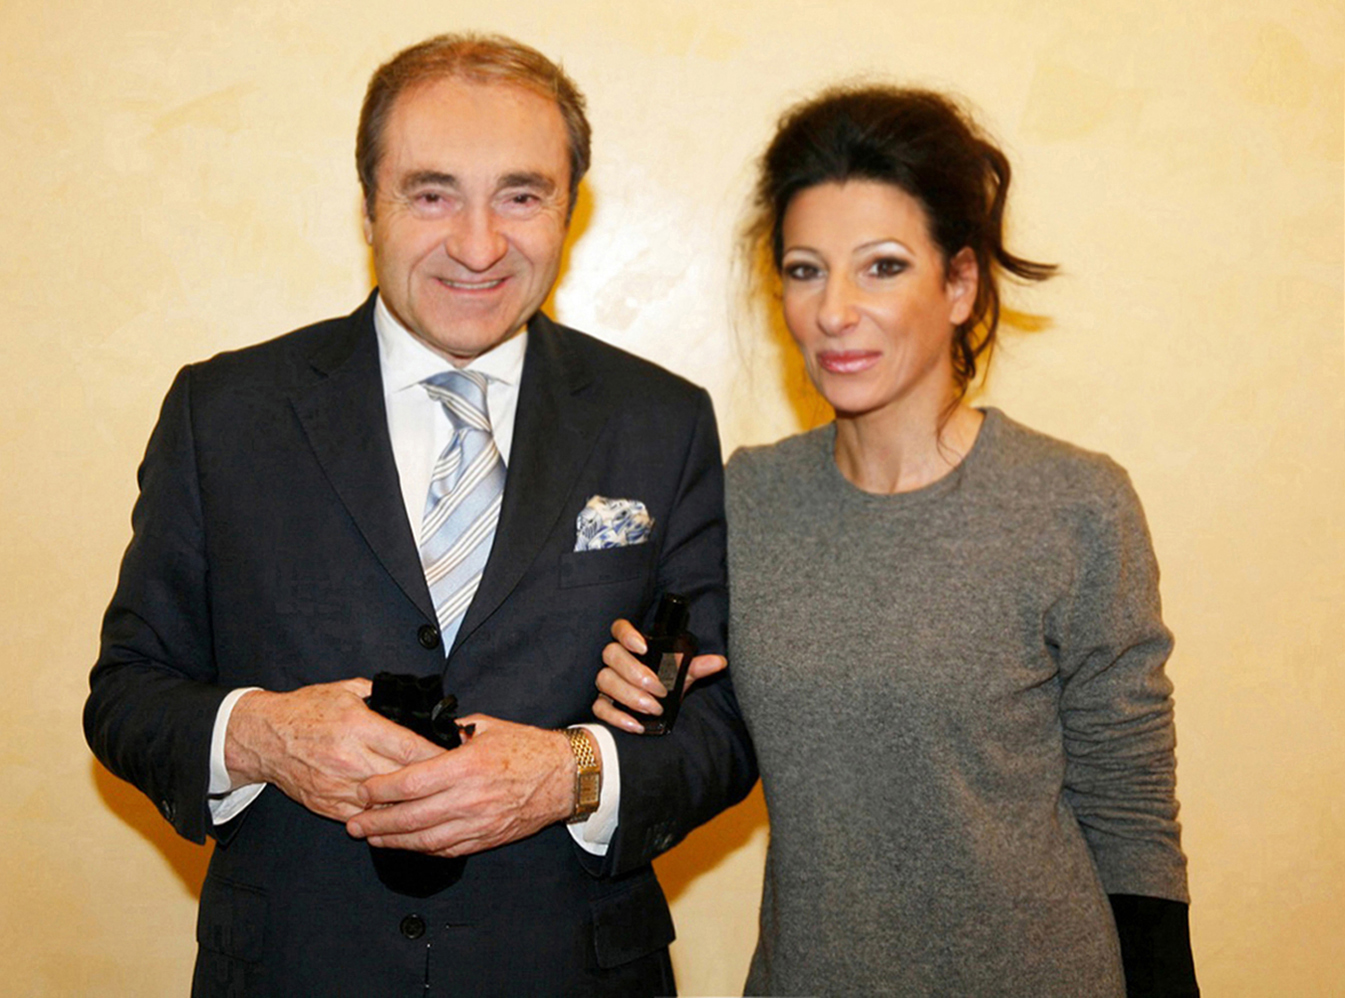 Lucia Aliberti with the Entrepreneur,Consulting and Ambassador of the"Authentic Places"Frank Schnitzler⚘Hotel Breidenbacher Hof⚘Dusseldorf⚘Photo taken from the Newspaper⚘:http://www.luciaaliberti.it #luciaaliberti #frankschnitzler #hotelreidenbacherhof #dusseldorf